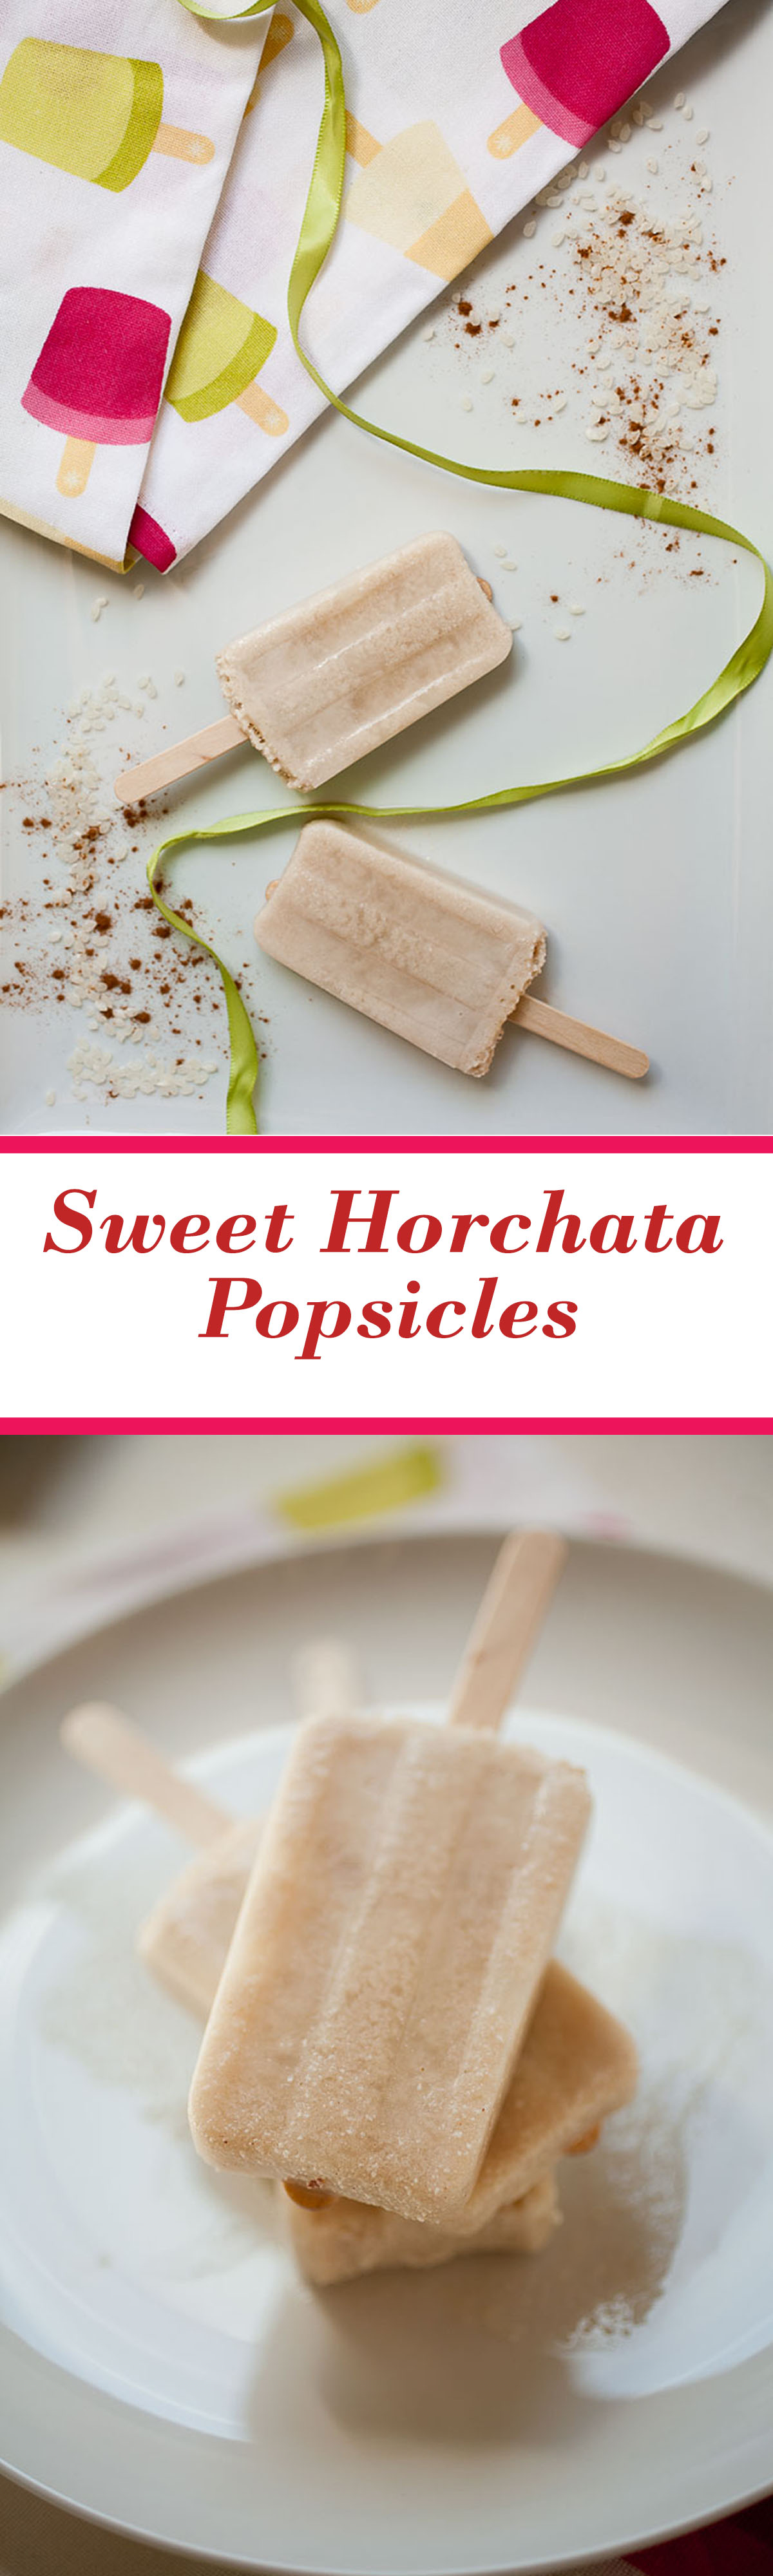 These sweet, creamy homemade horchata Popsicles are a perfect summer treat!